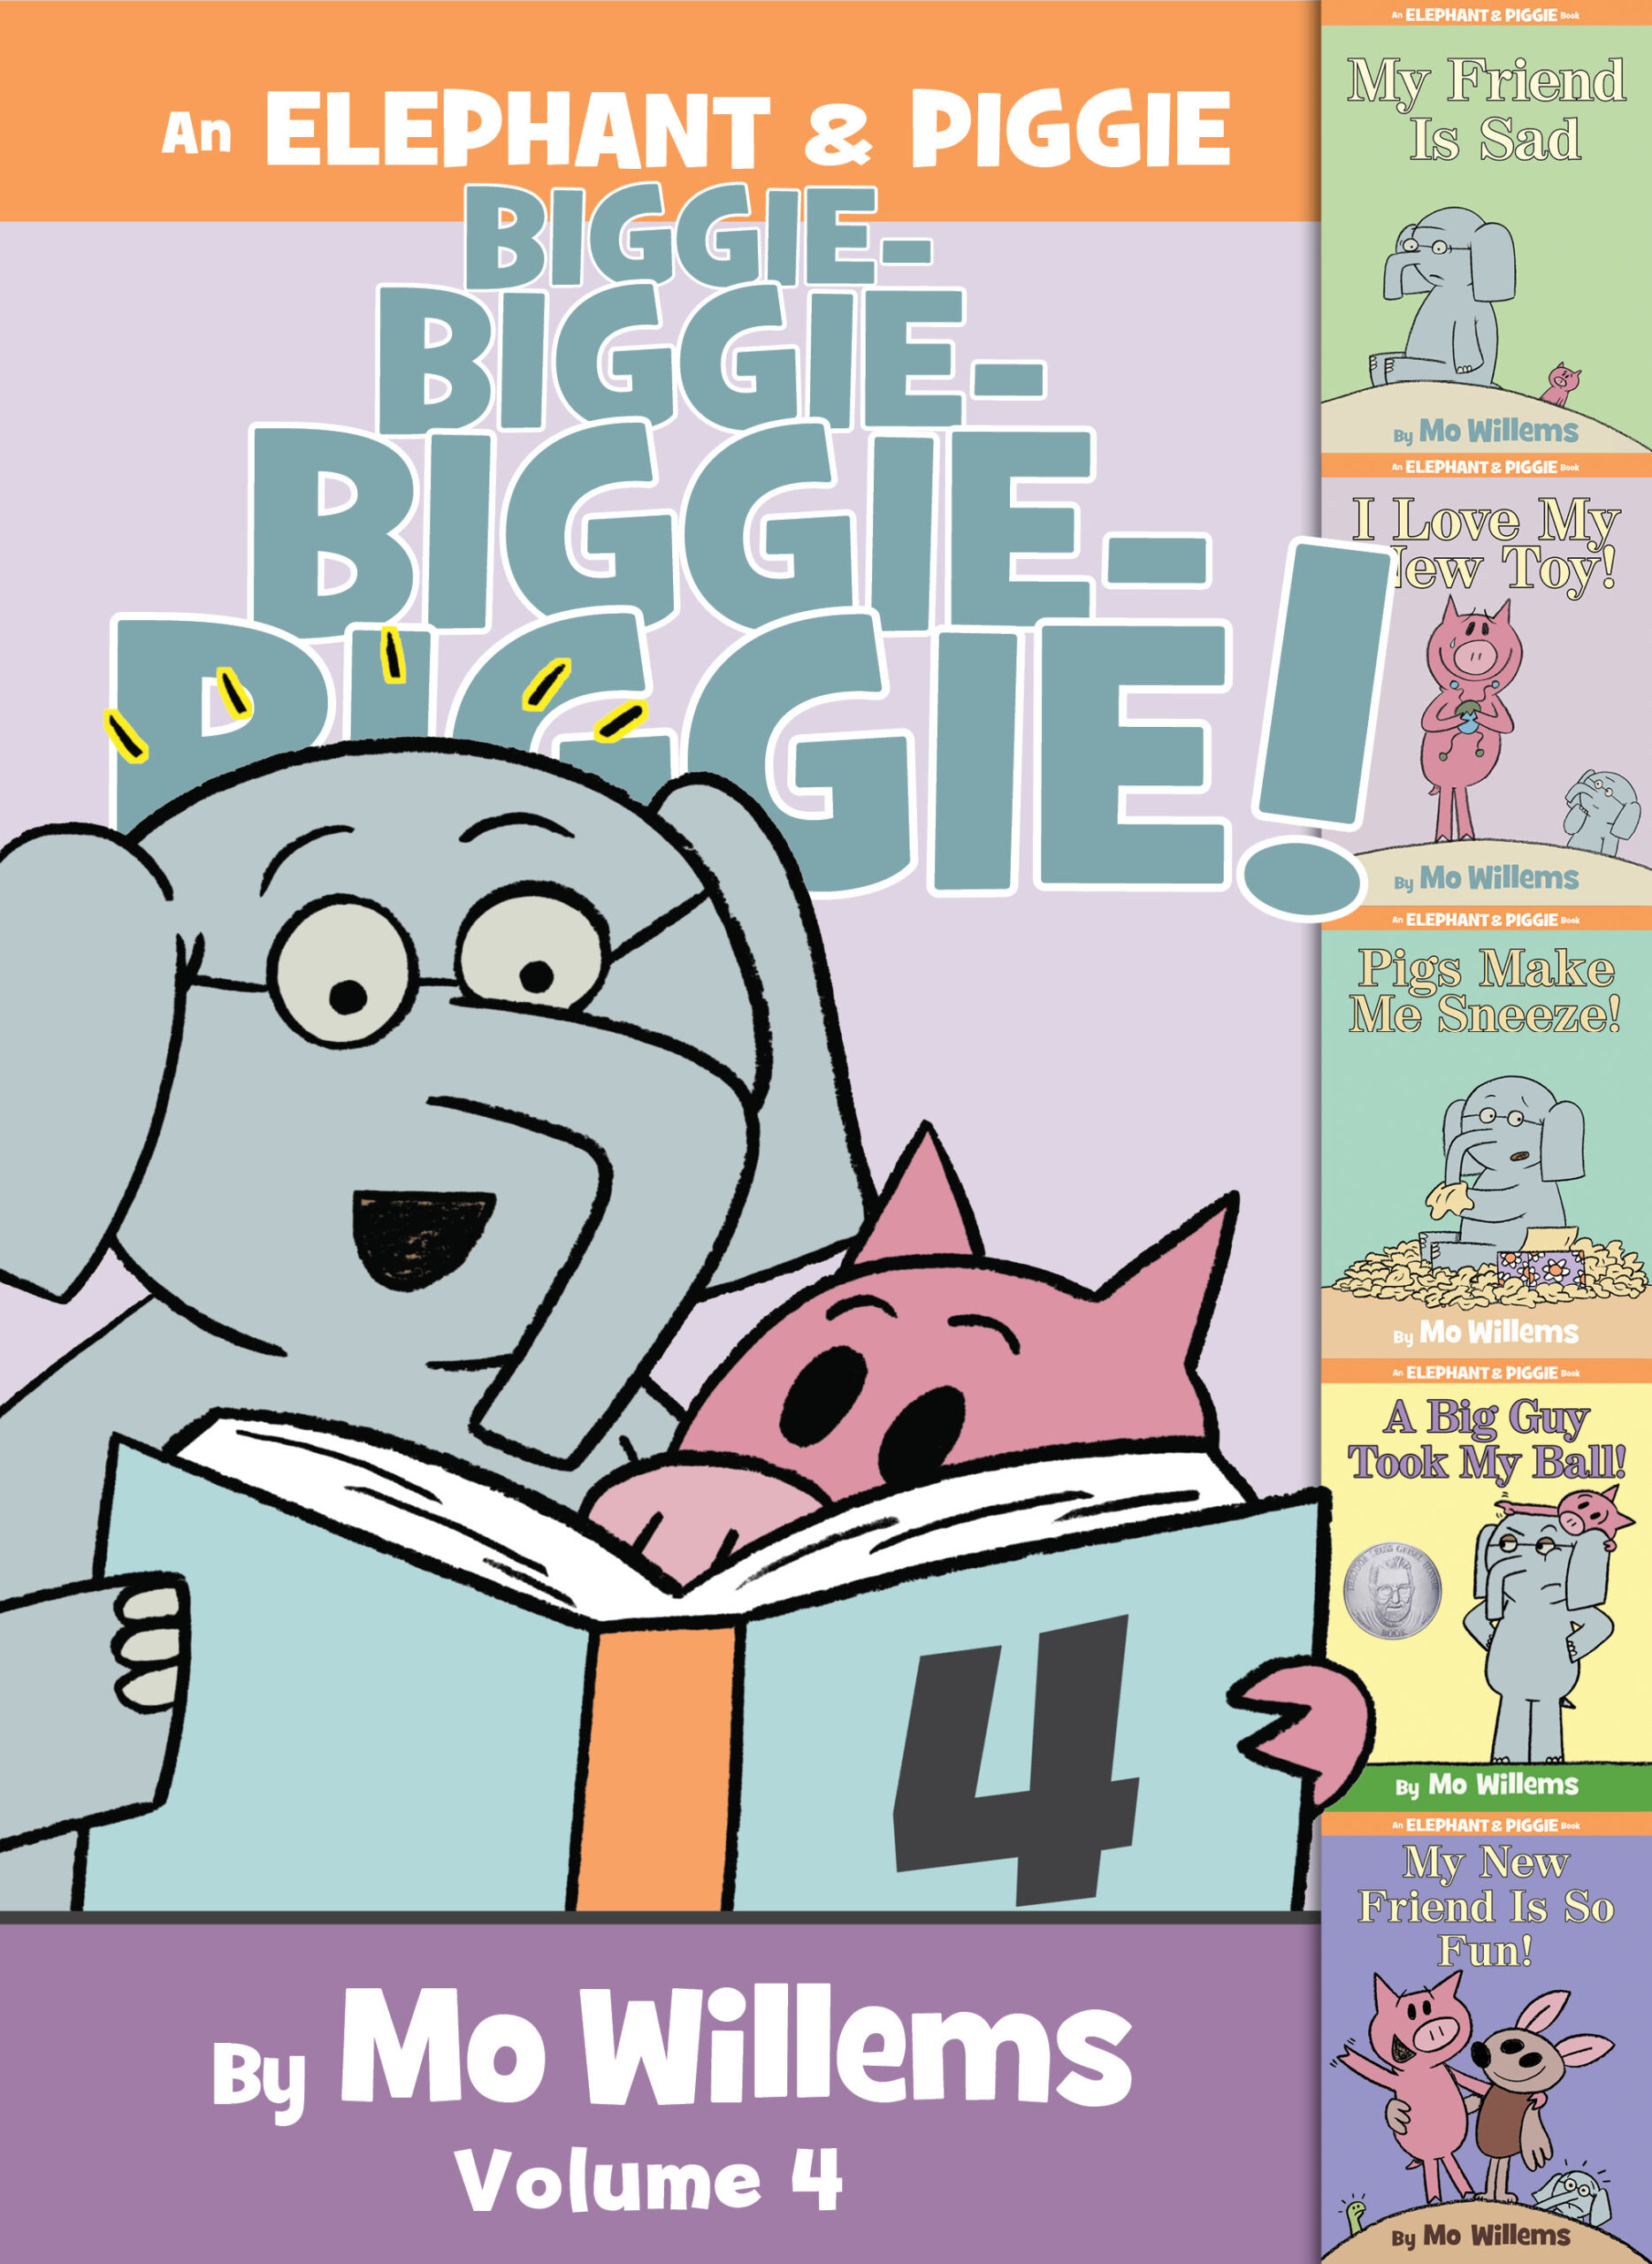 My New Friend Is So Fun! An Elephant and Piggie Book 